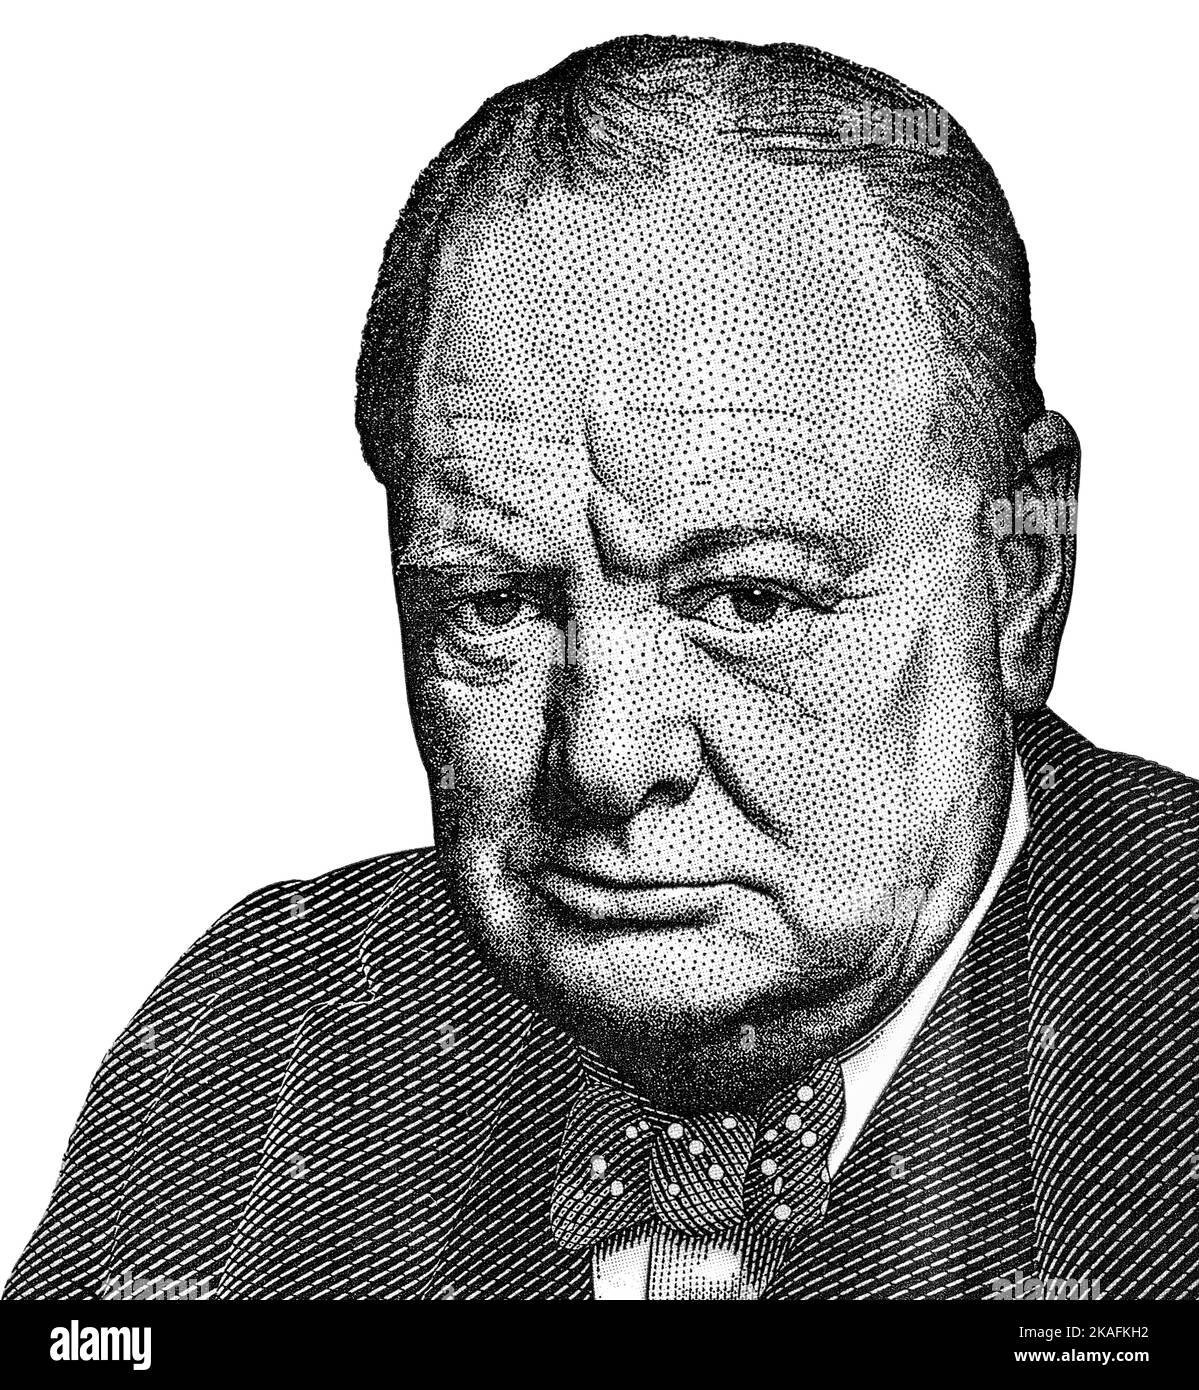 Sir Winston Churchill (1874 - 1965) portrait from British five pounds sterling banknote Stock Photo